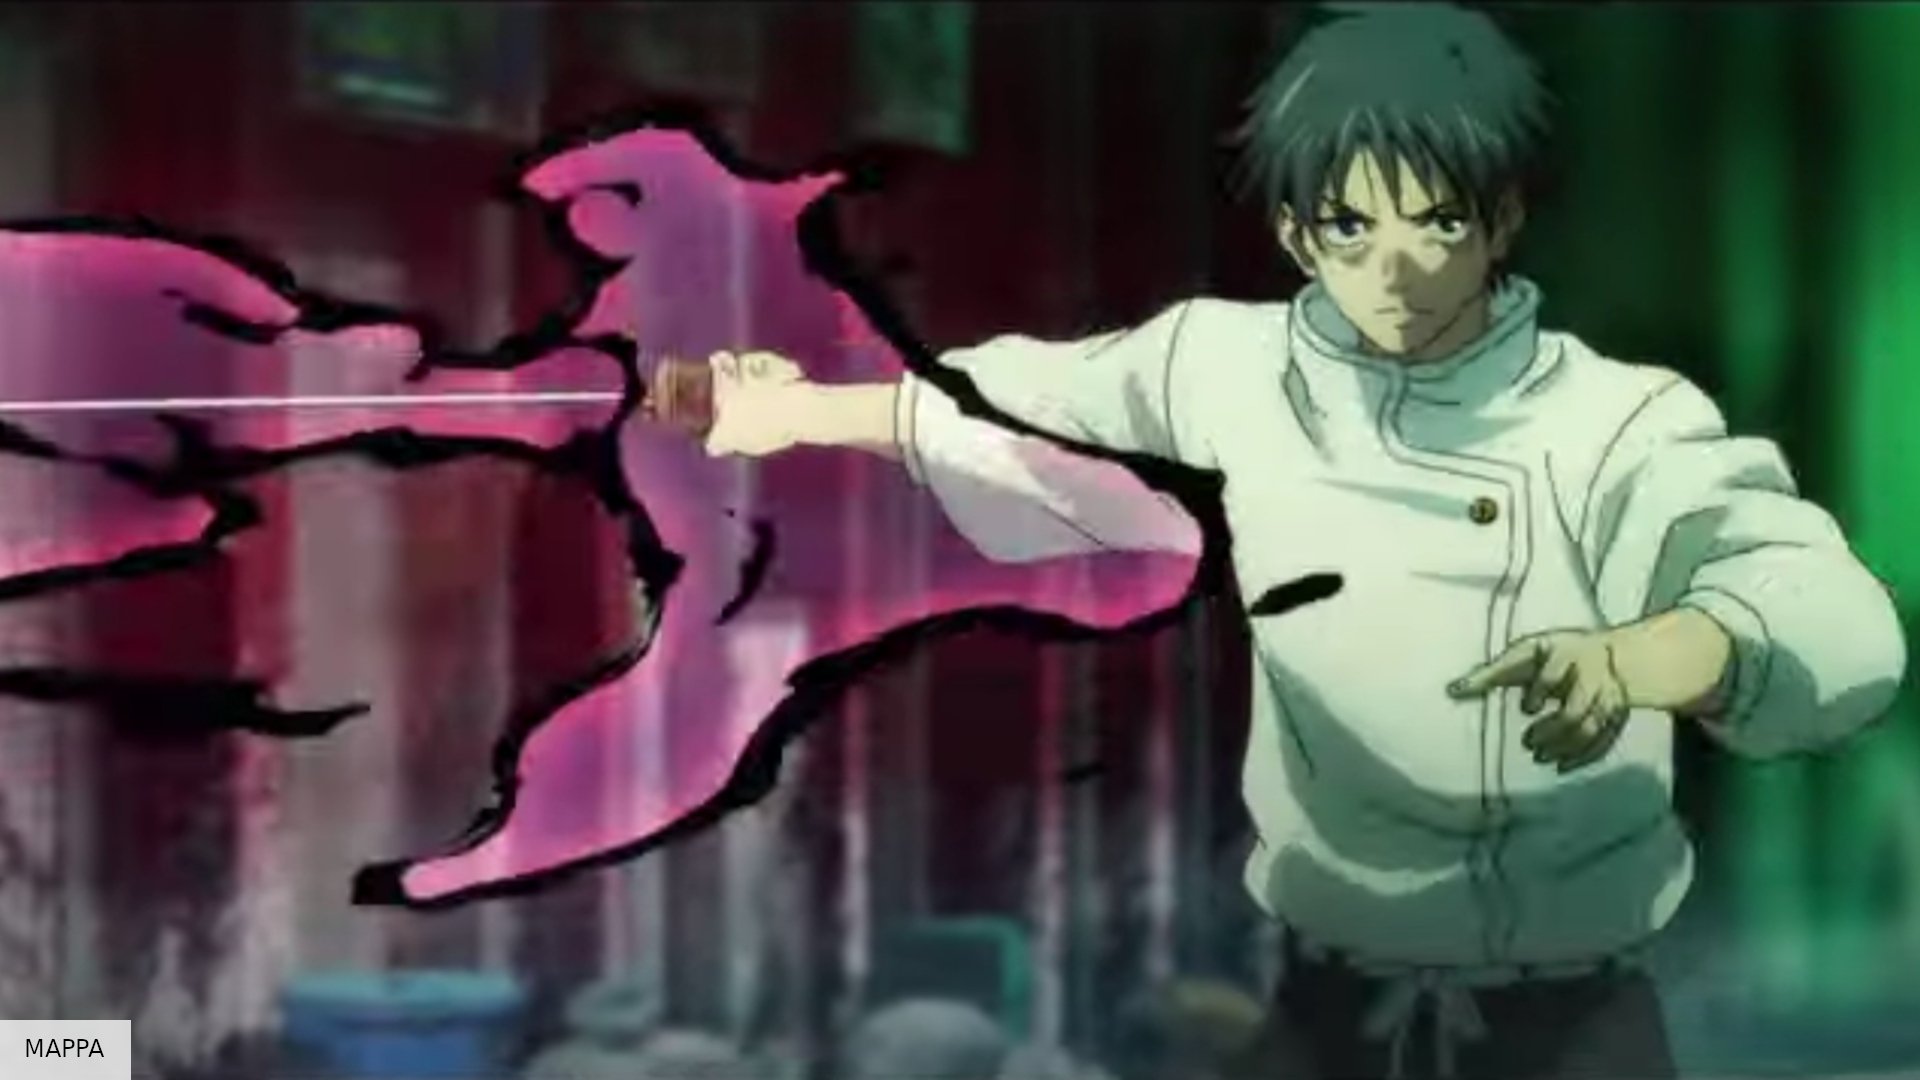 Jujutsu Kaisen 0 trailer introduces new heroes for anime series prequel